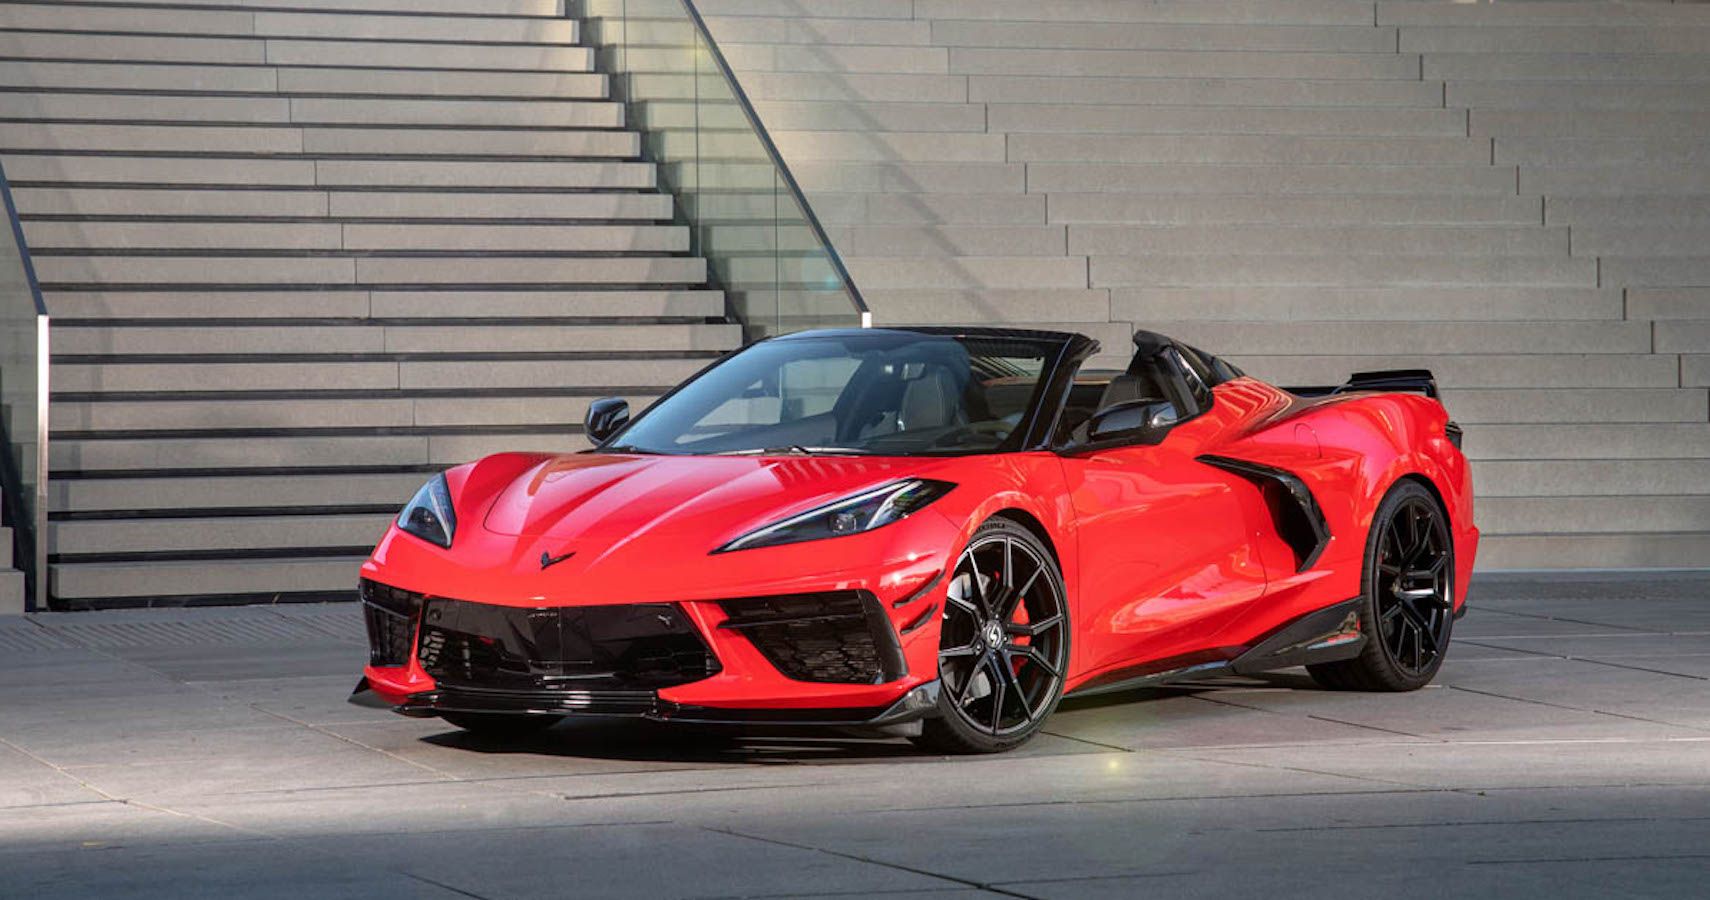 Why This Modified Chevrolet C8 Corvette’s Aggressive Styling Makes It Faster